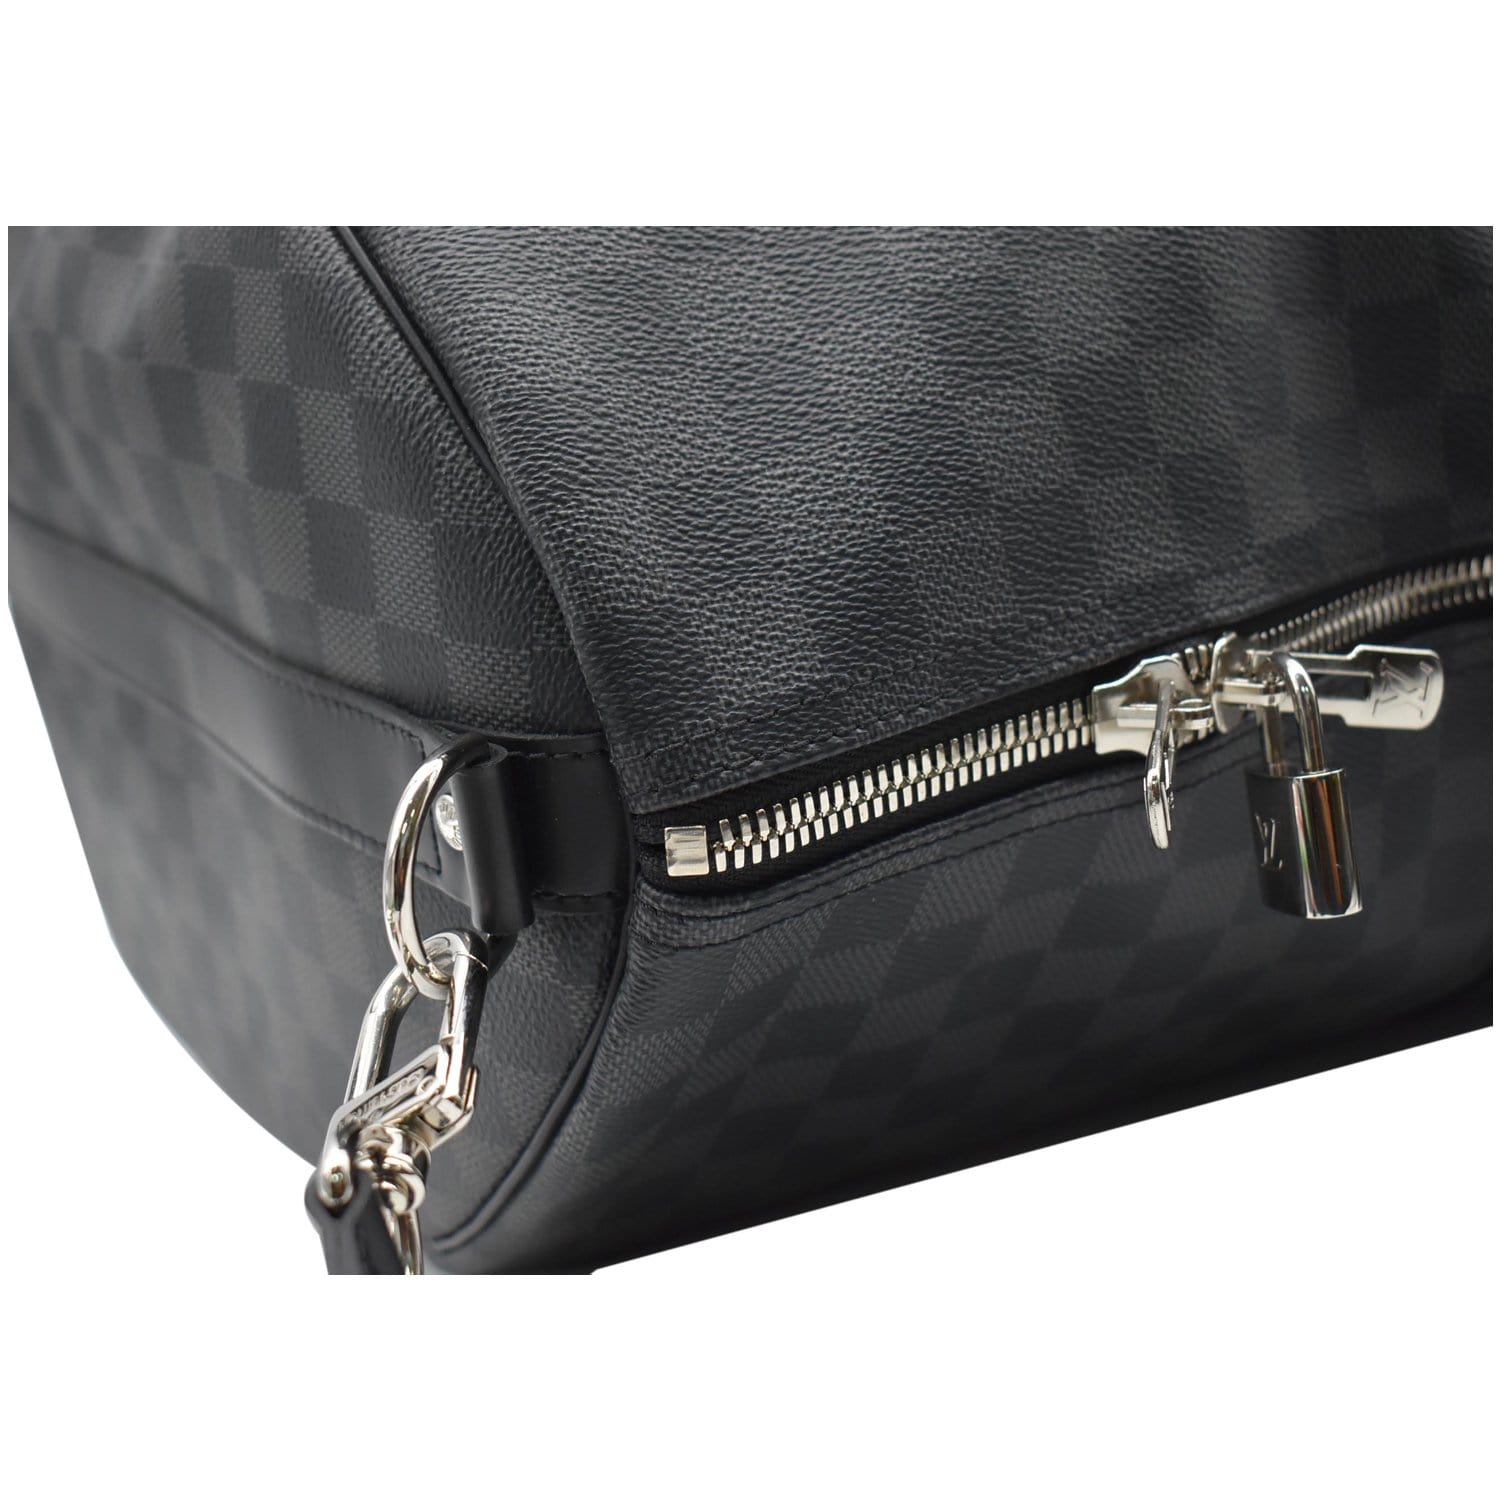 Louis Vuitton Keepall Damier Graphite Bandouliere 55 with Strap 872889 Black  Coated Canvas Weekend/Travel Bag, Louis Vuitton